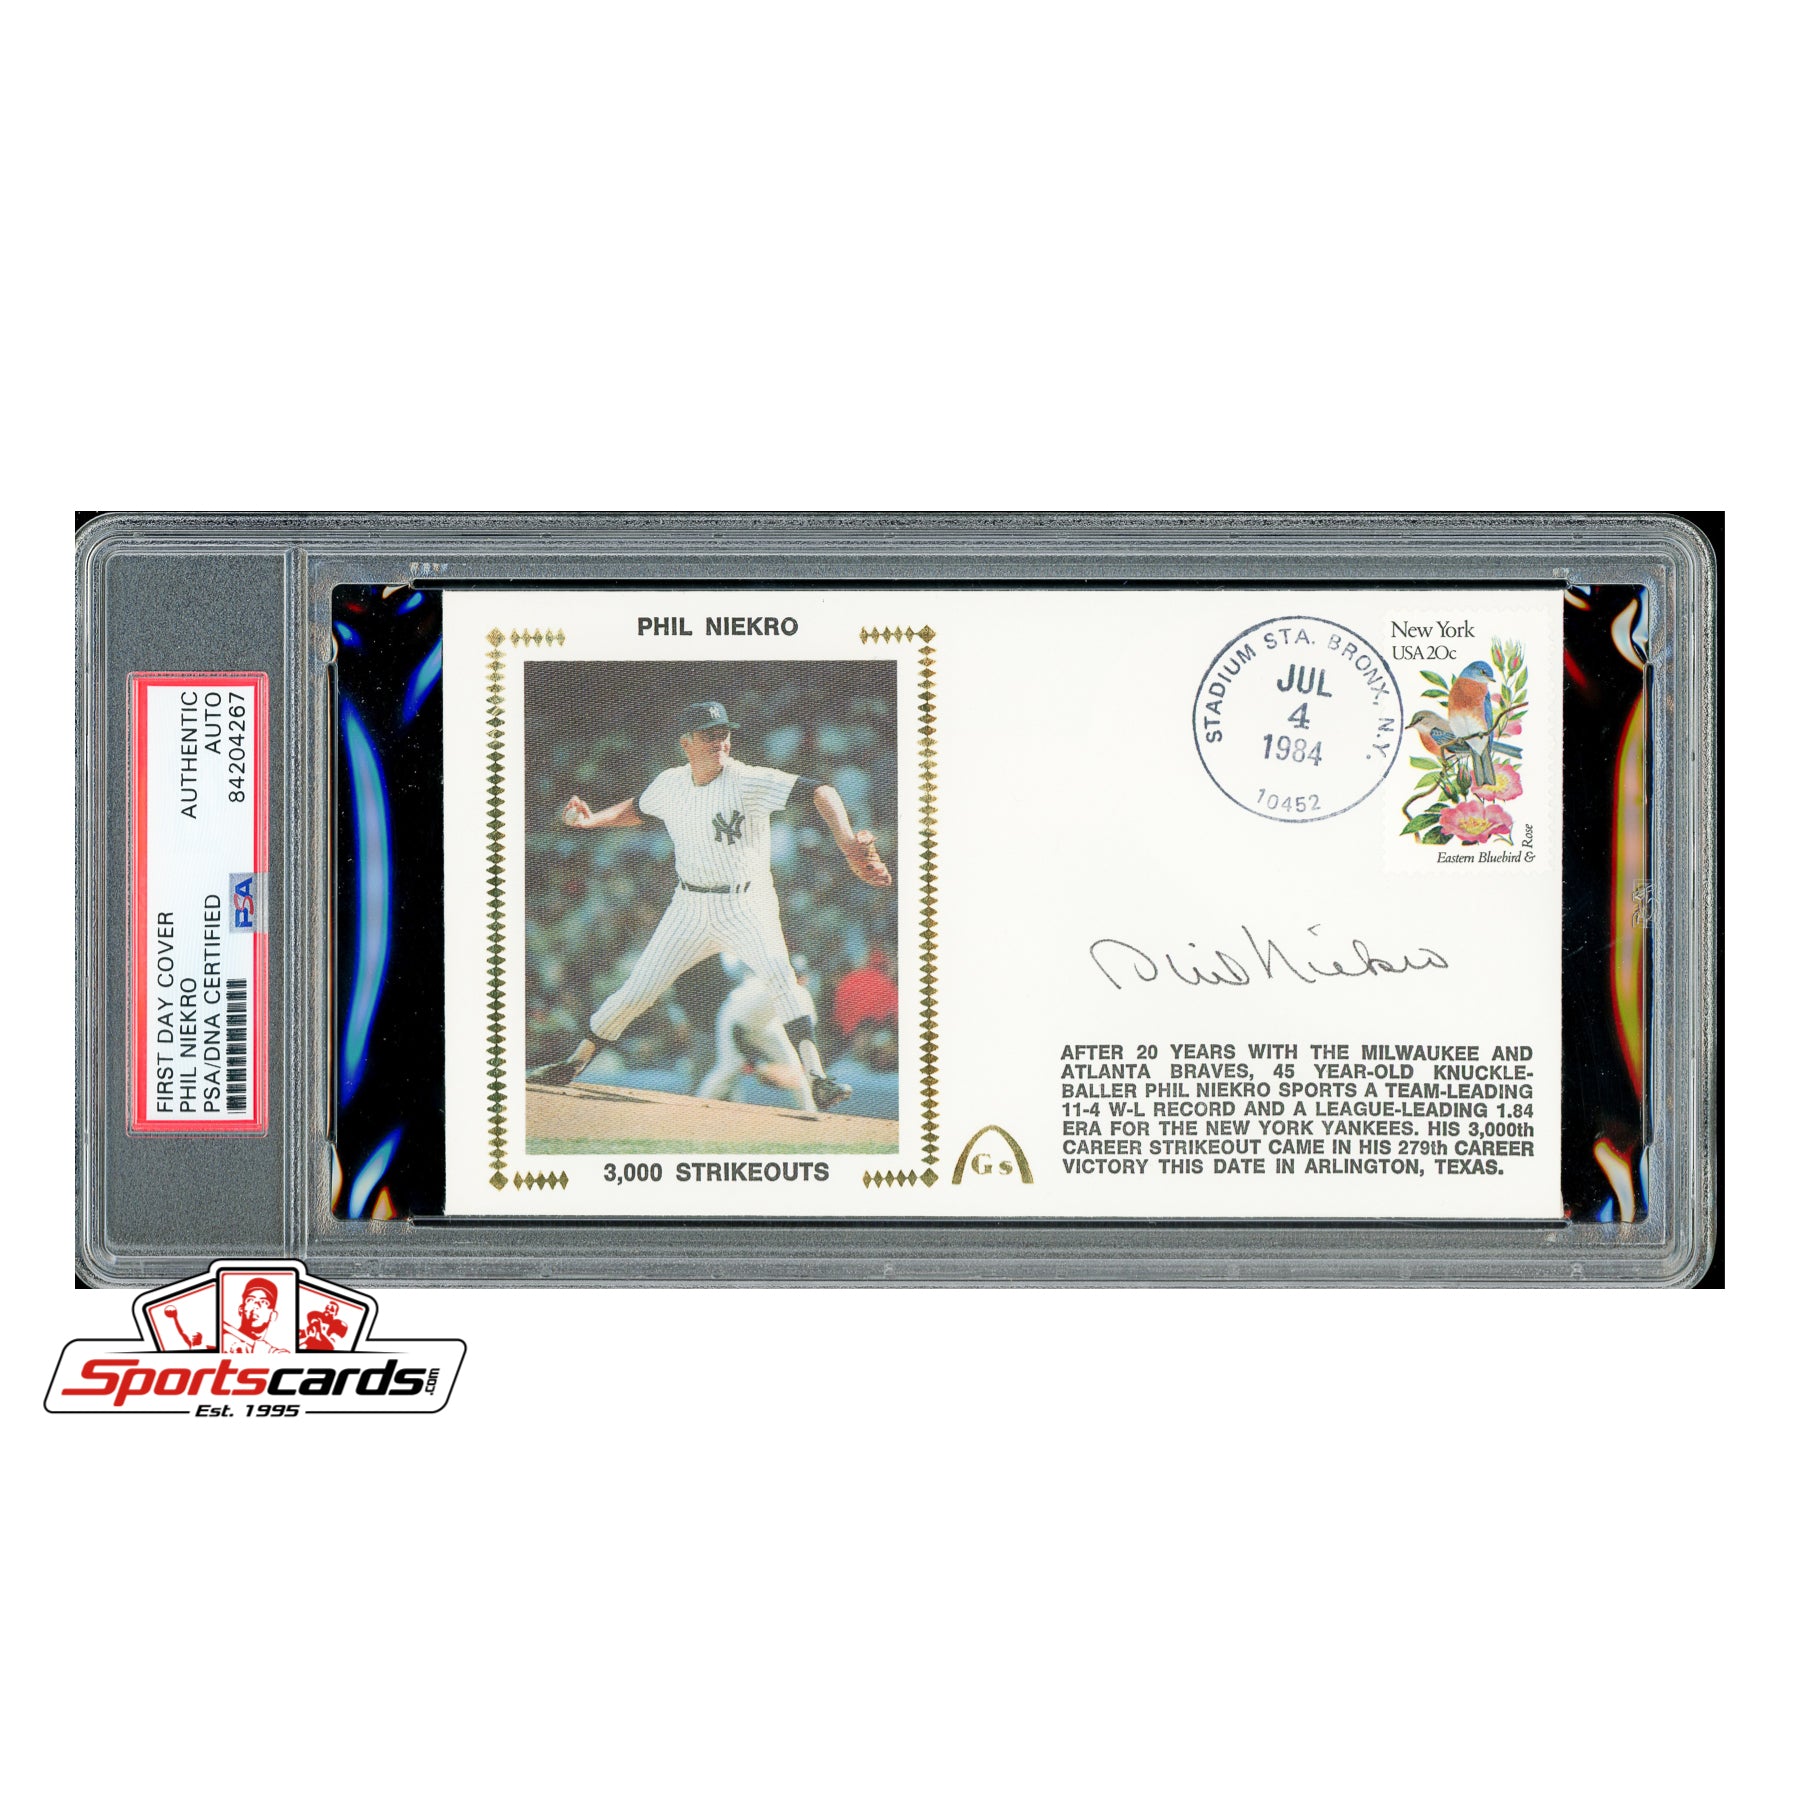 Phil Niekro Signed Auto 3000 Strikeouts Gateway Cover FDC